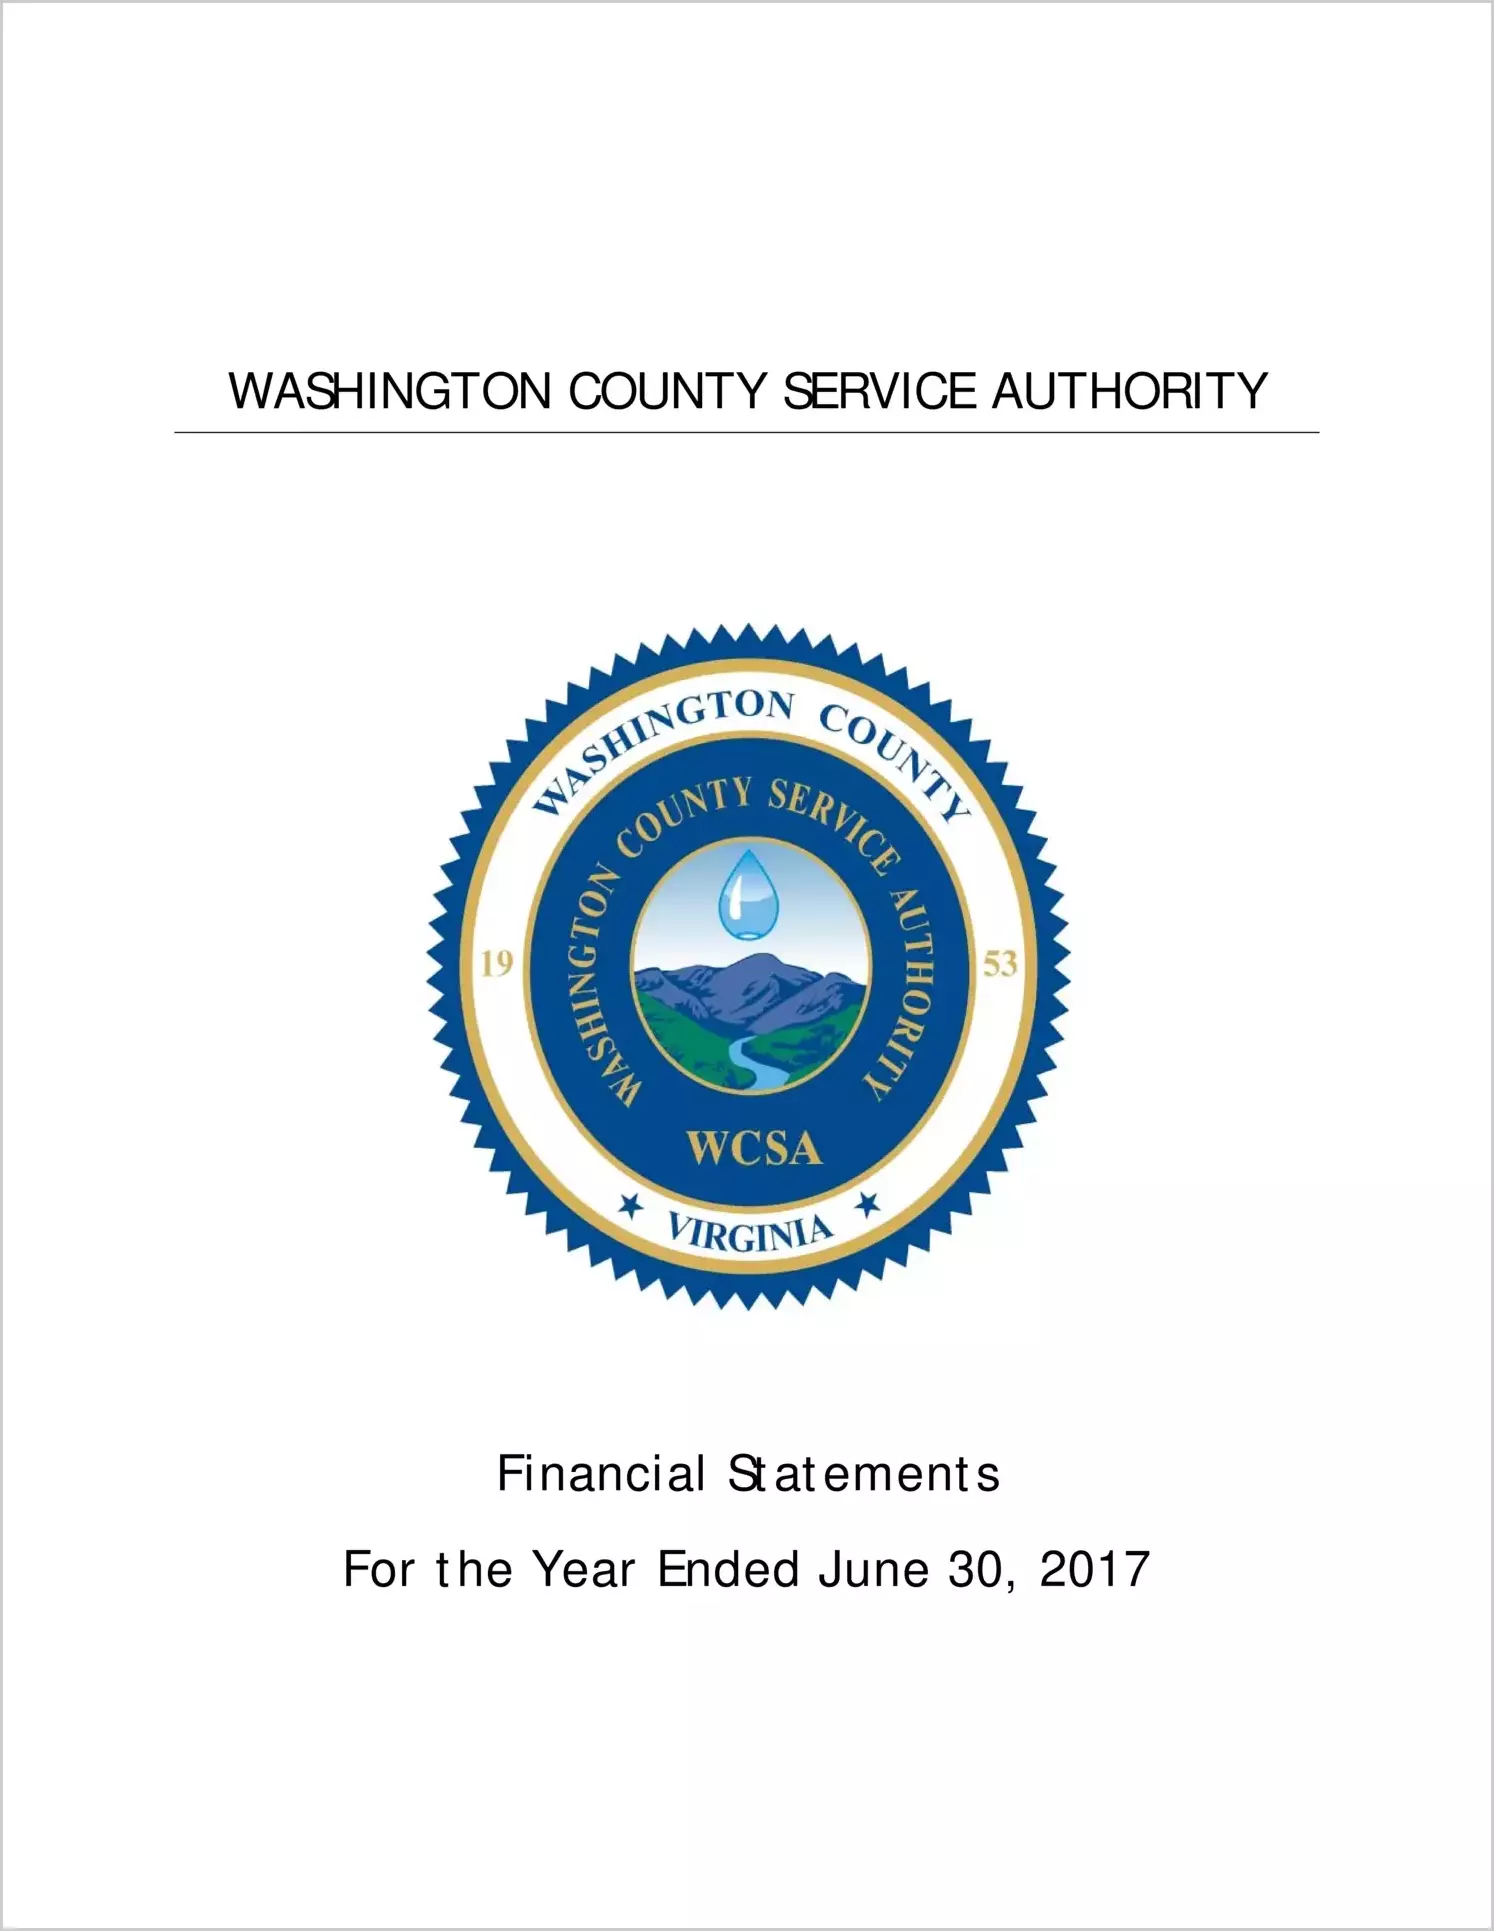 2017 ABC/Other Annual Financial Report  for Washington County Service Authority